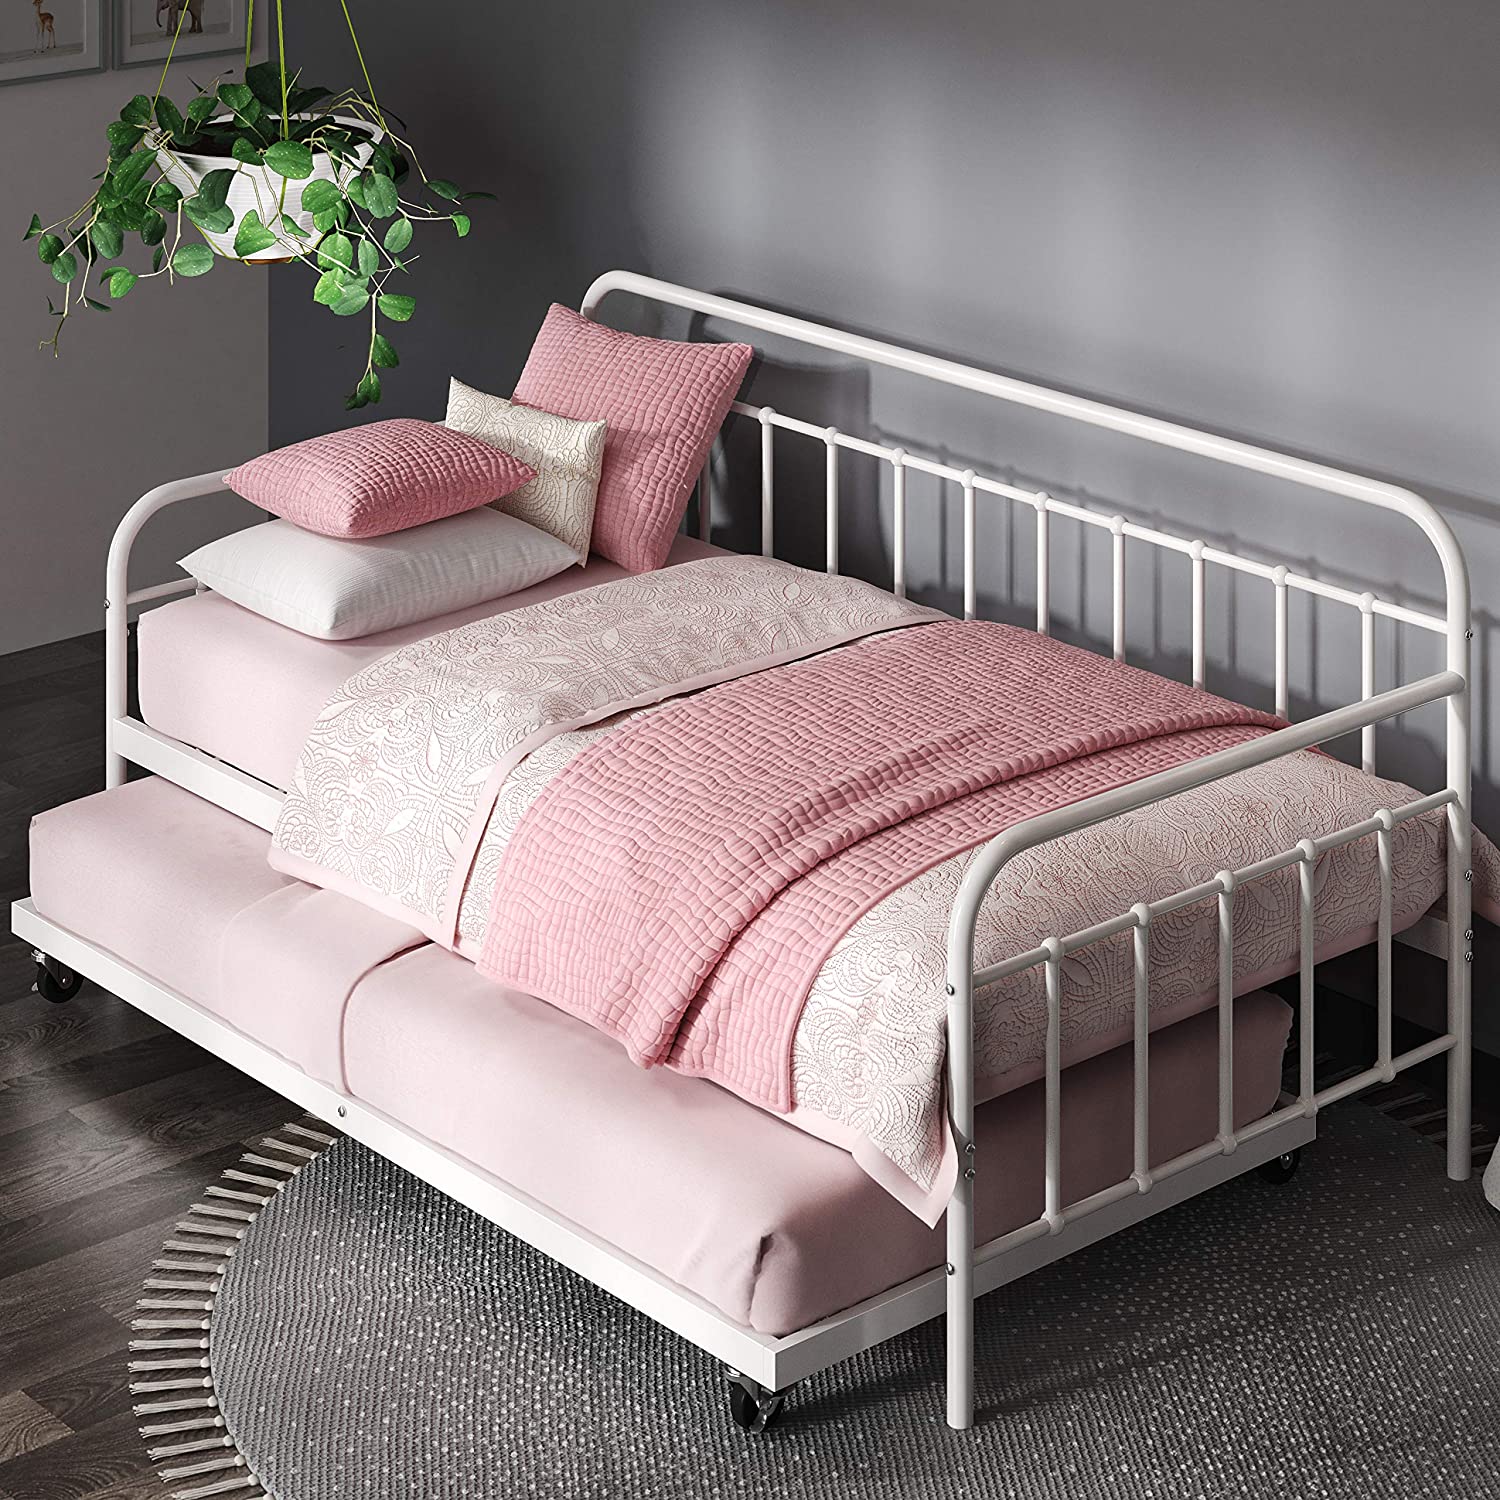 4. Zinus Florence Twin Daybed and Trundle Set